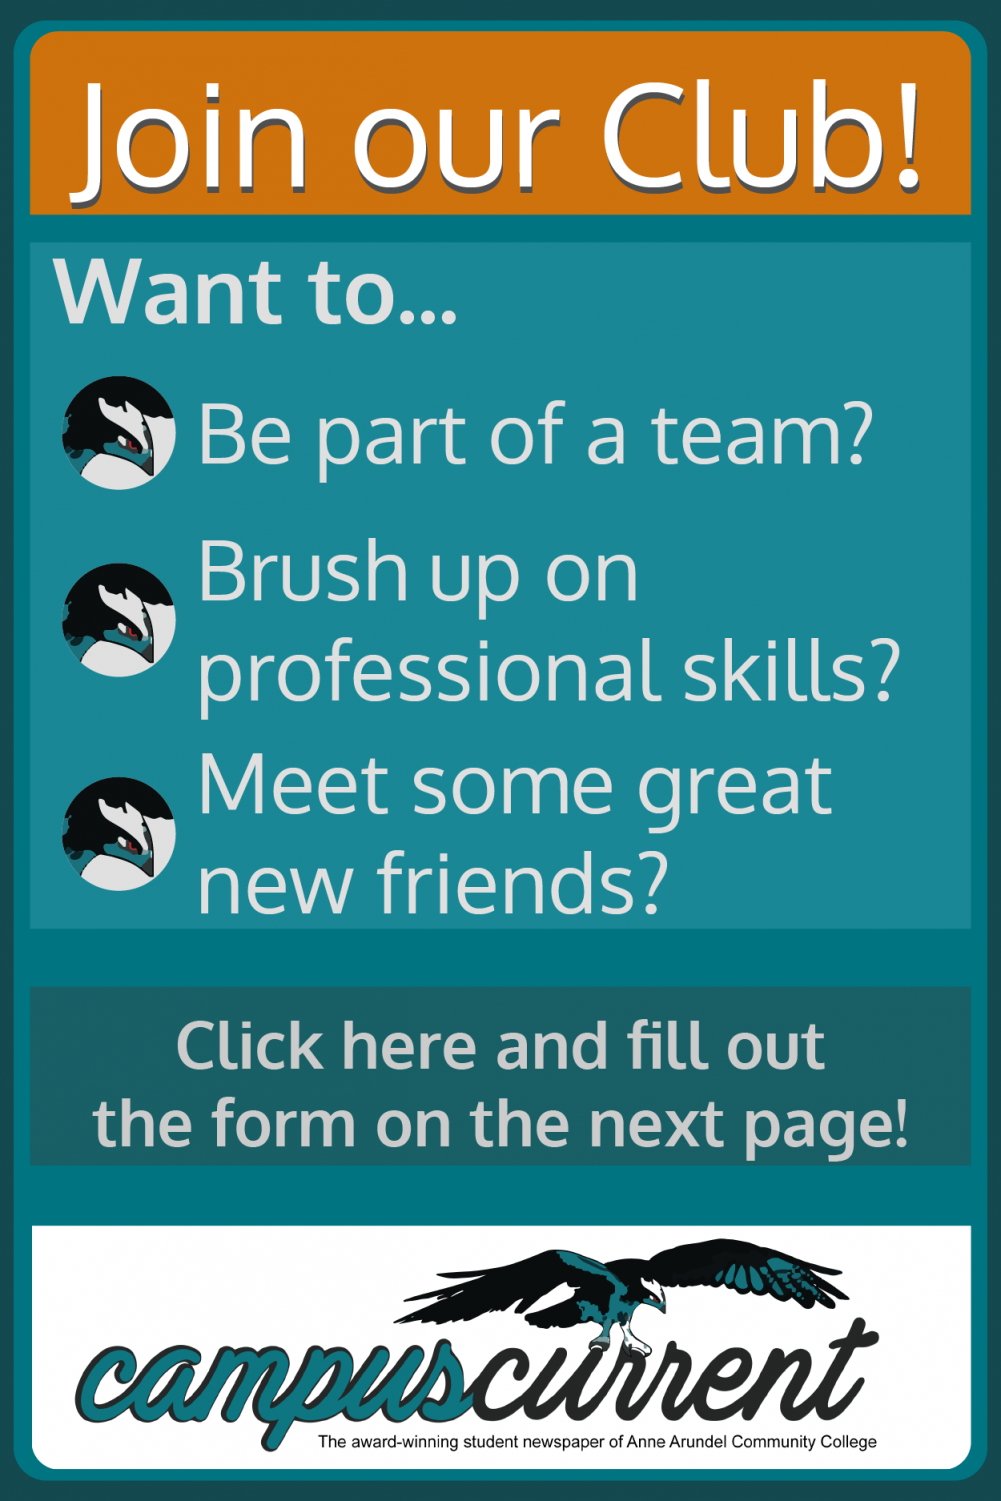 Join our club! Want to... Be part of a team? Brush up on your professional skills? Meet some great new friends? Click here and fill out the form on the next page!